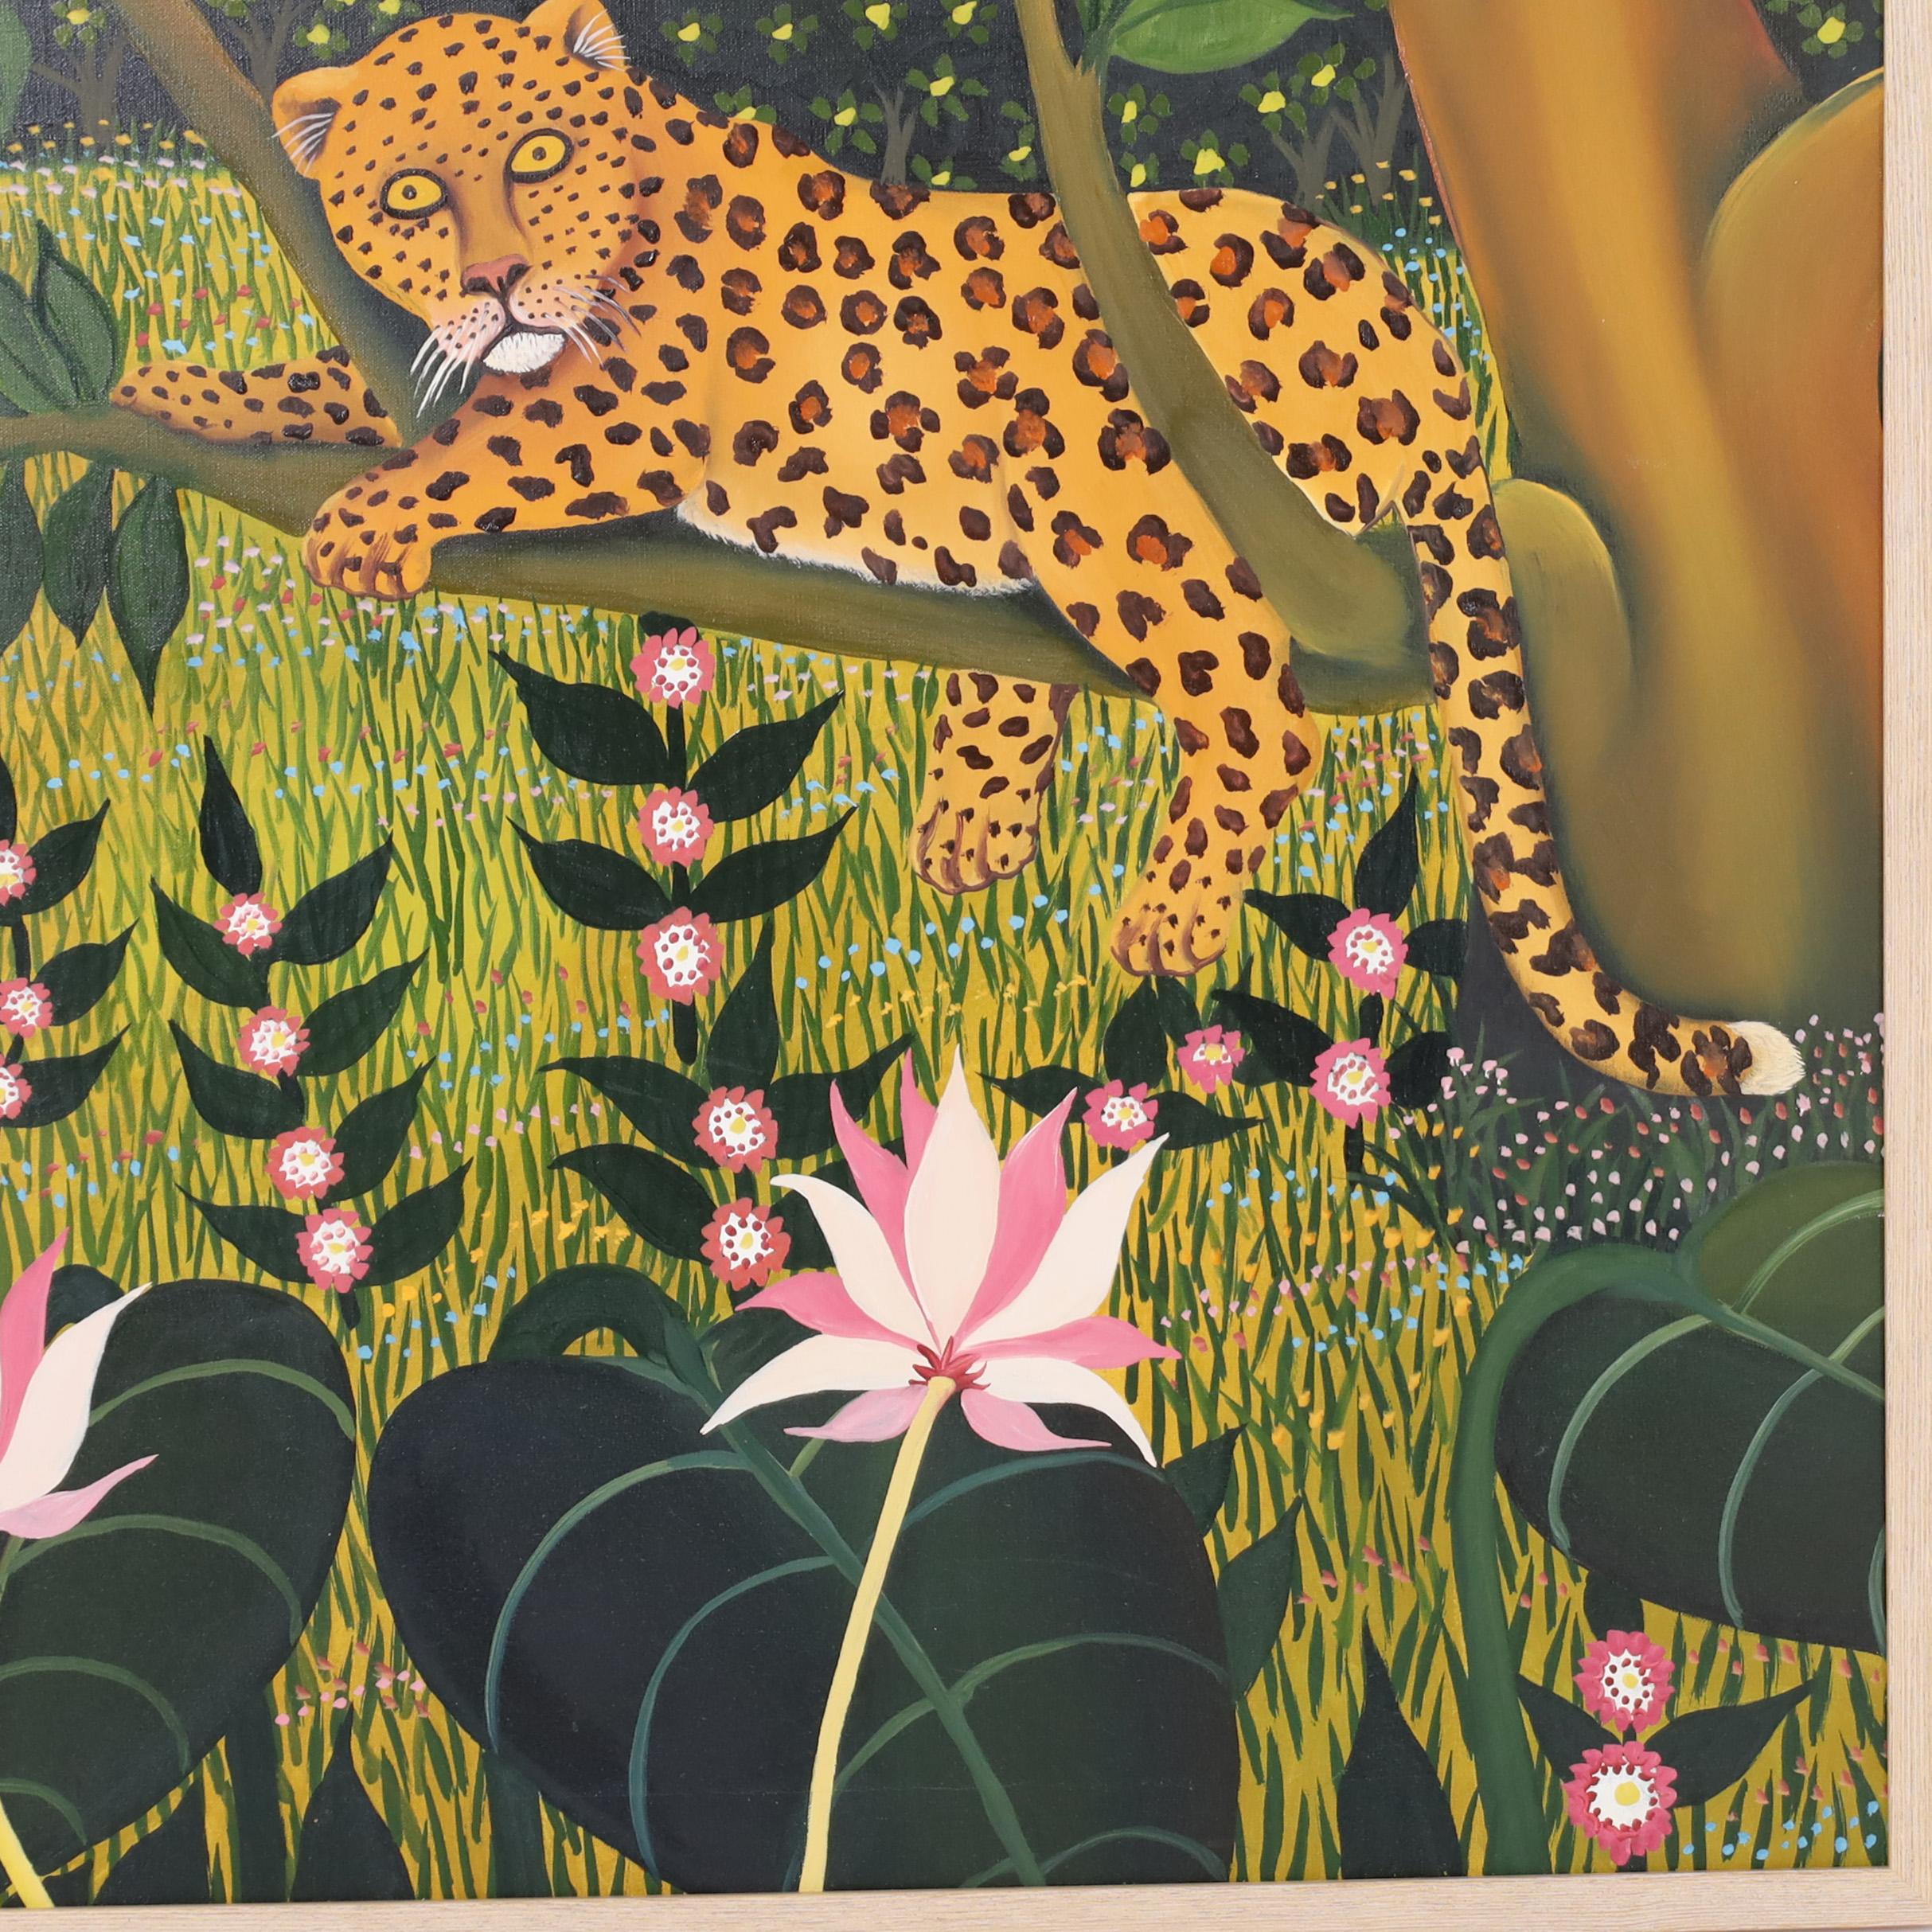 Vintage Painting on Canvas of a Leopard and Parrot in a Jungle Setting For Sale 2